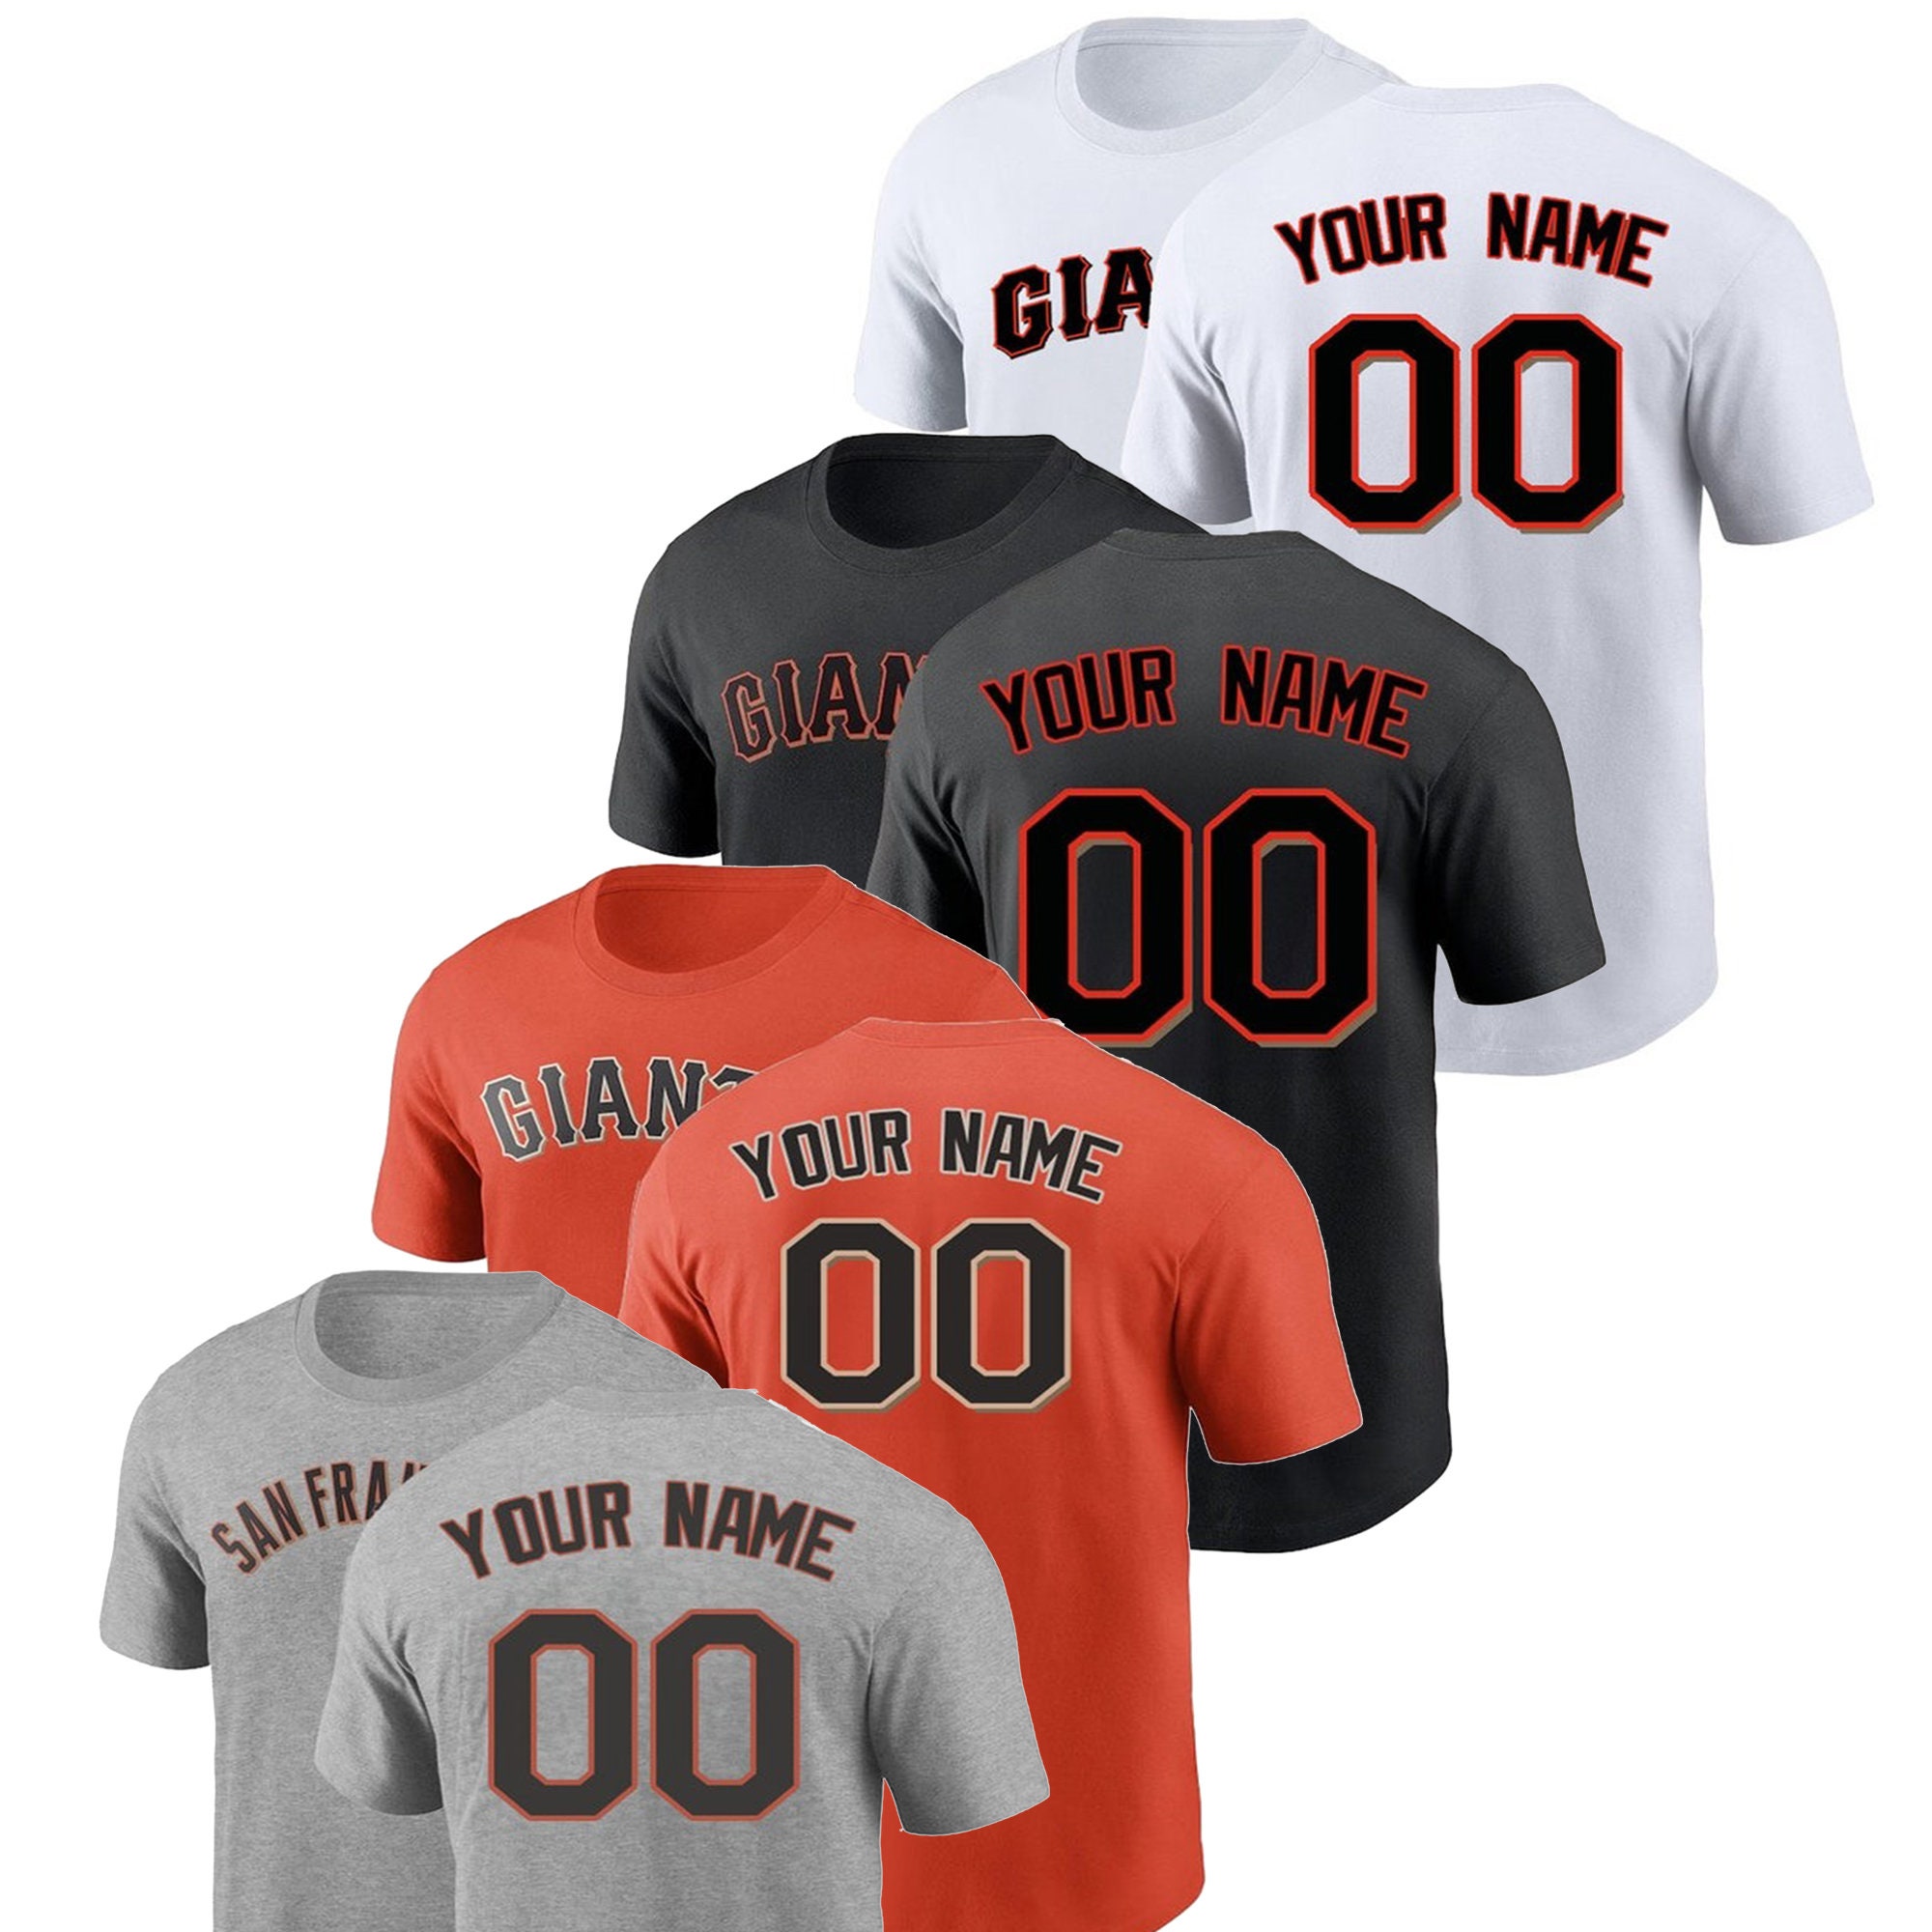 SF Giants will wear player names on home uniforms in 2021